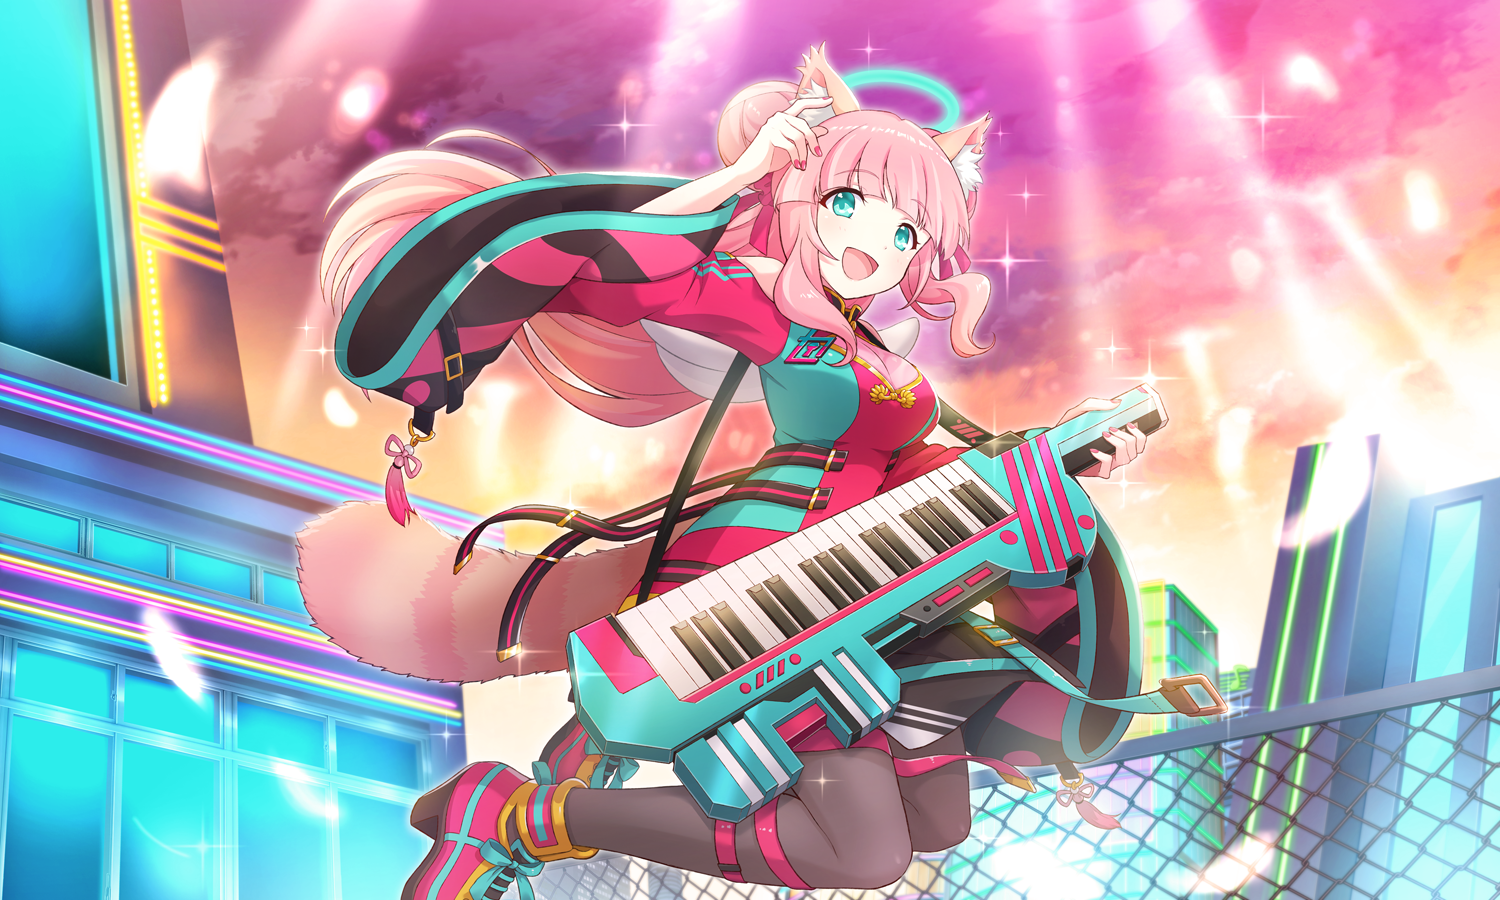 Piano Rock Band SHE'S Performs Songs for Blue Thermal Anime Film About  Glider Club - News - Anime News Network